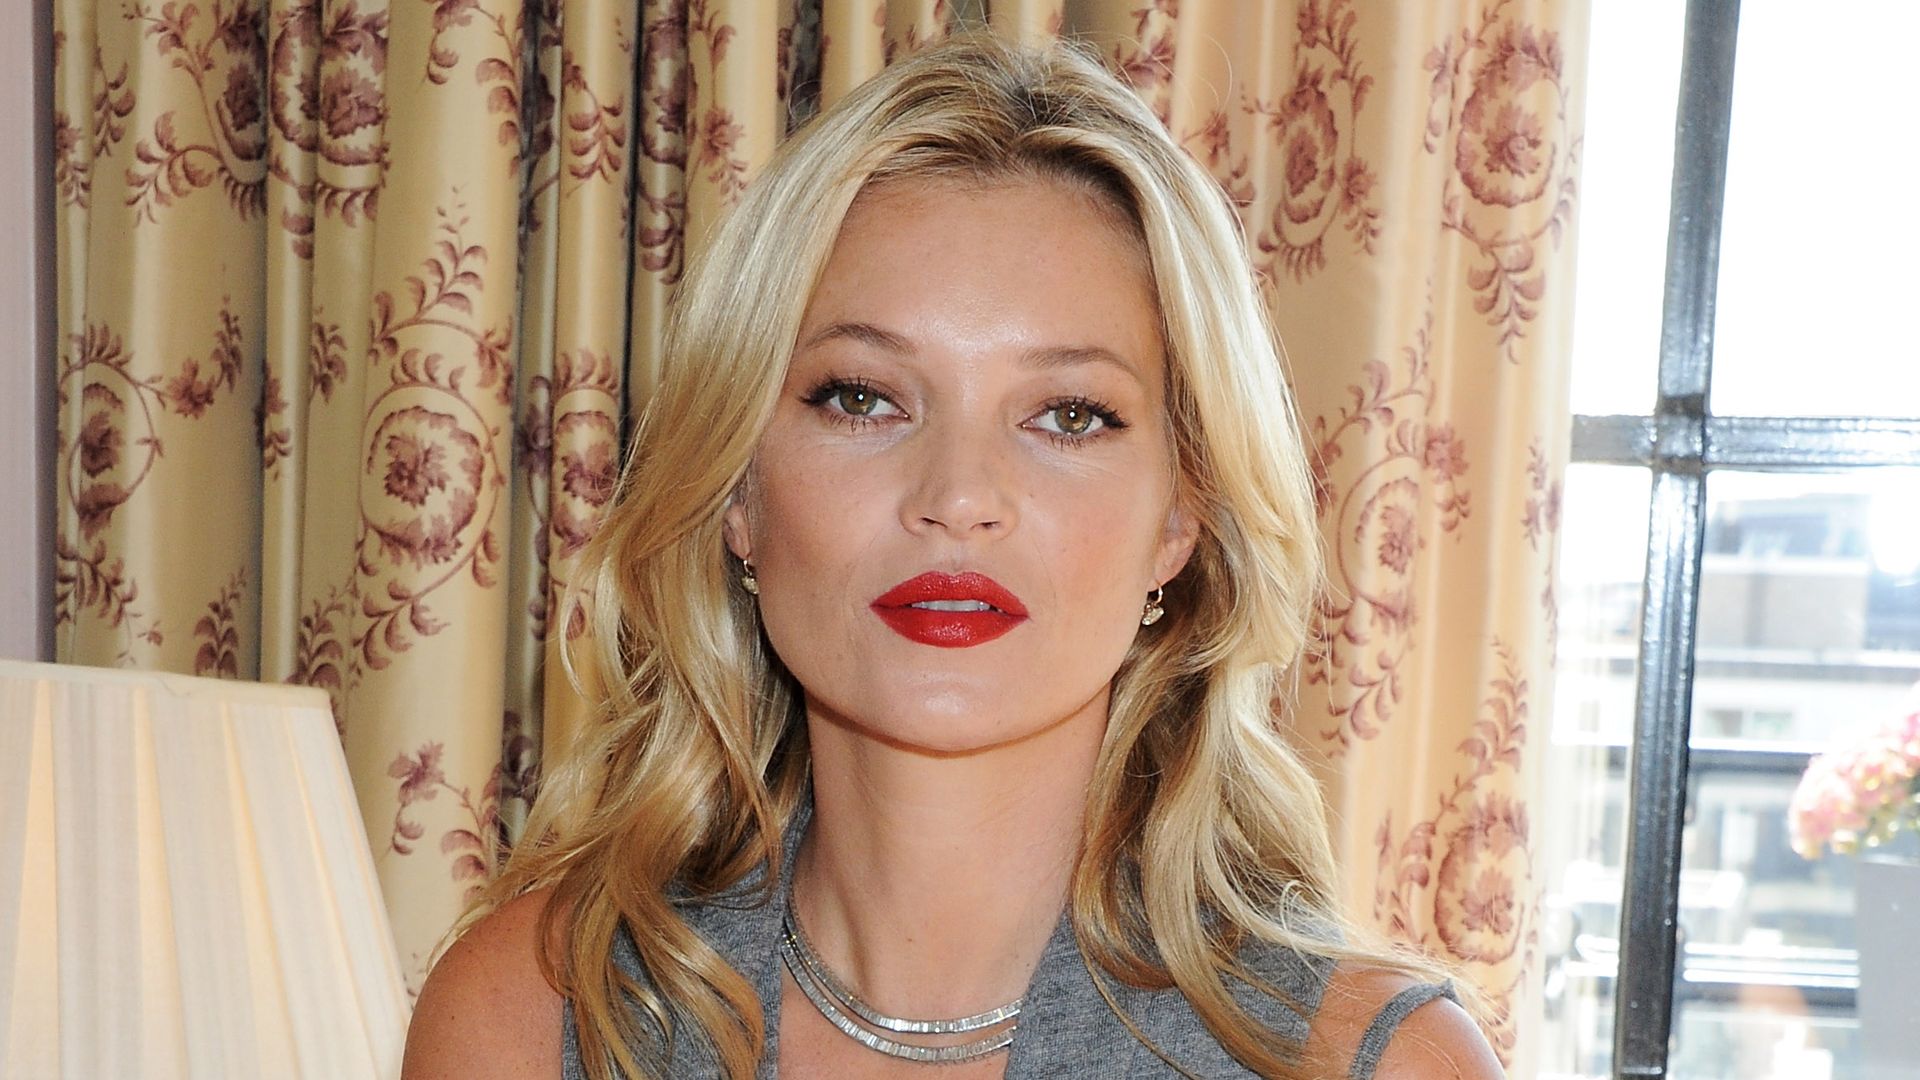 LONDON, ENGLAND - SEPTEMBER 15:  Rimmel celebrates its 10 year partnership with original London girl Kate Moss, who today launches her personally designed lipstick range for the brand "Kate Moss Lasting Finish Lipstick Collection" at Claridges Hotel on September 15, 2011 in London, England.  Kate wears shade No.1 from her collection.  (Photo by Dave M. Benett/Getty Images for Rimmel)